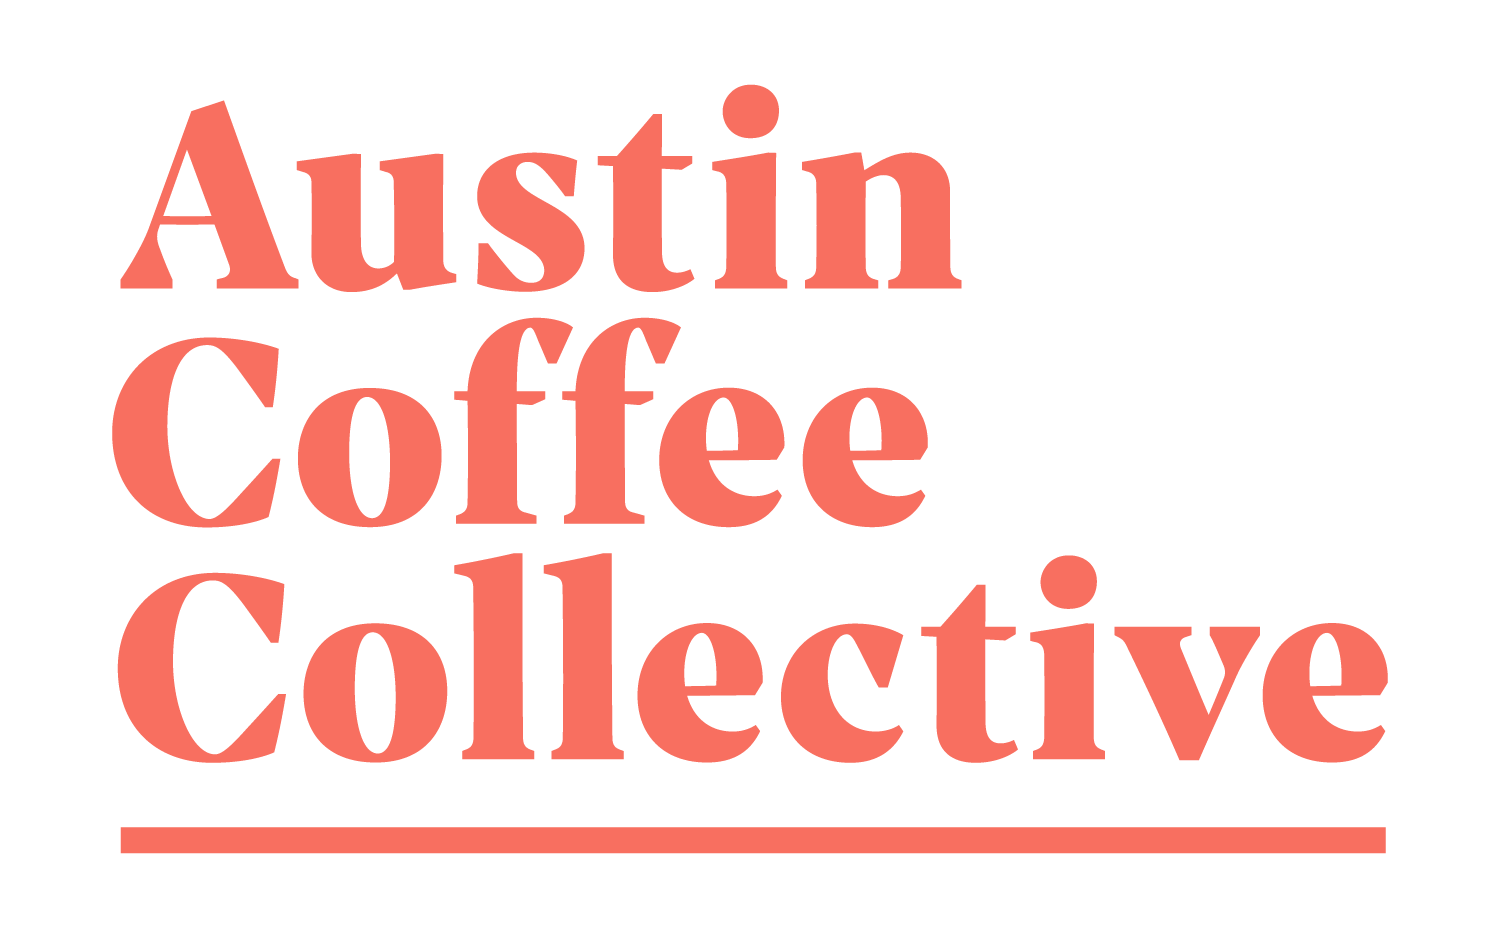 Austin Coffee Collective